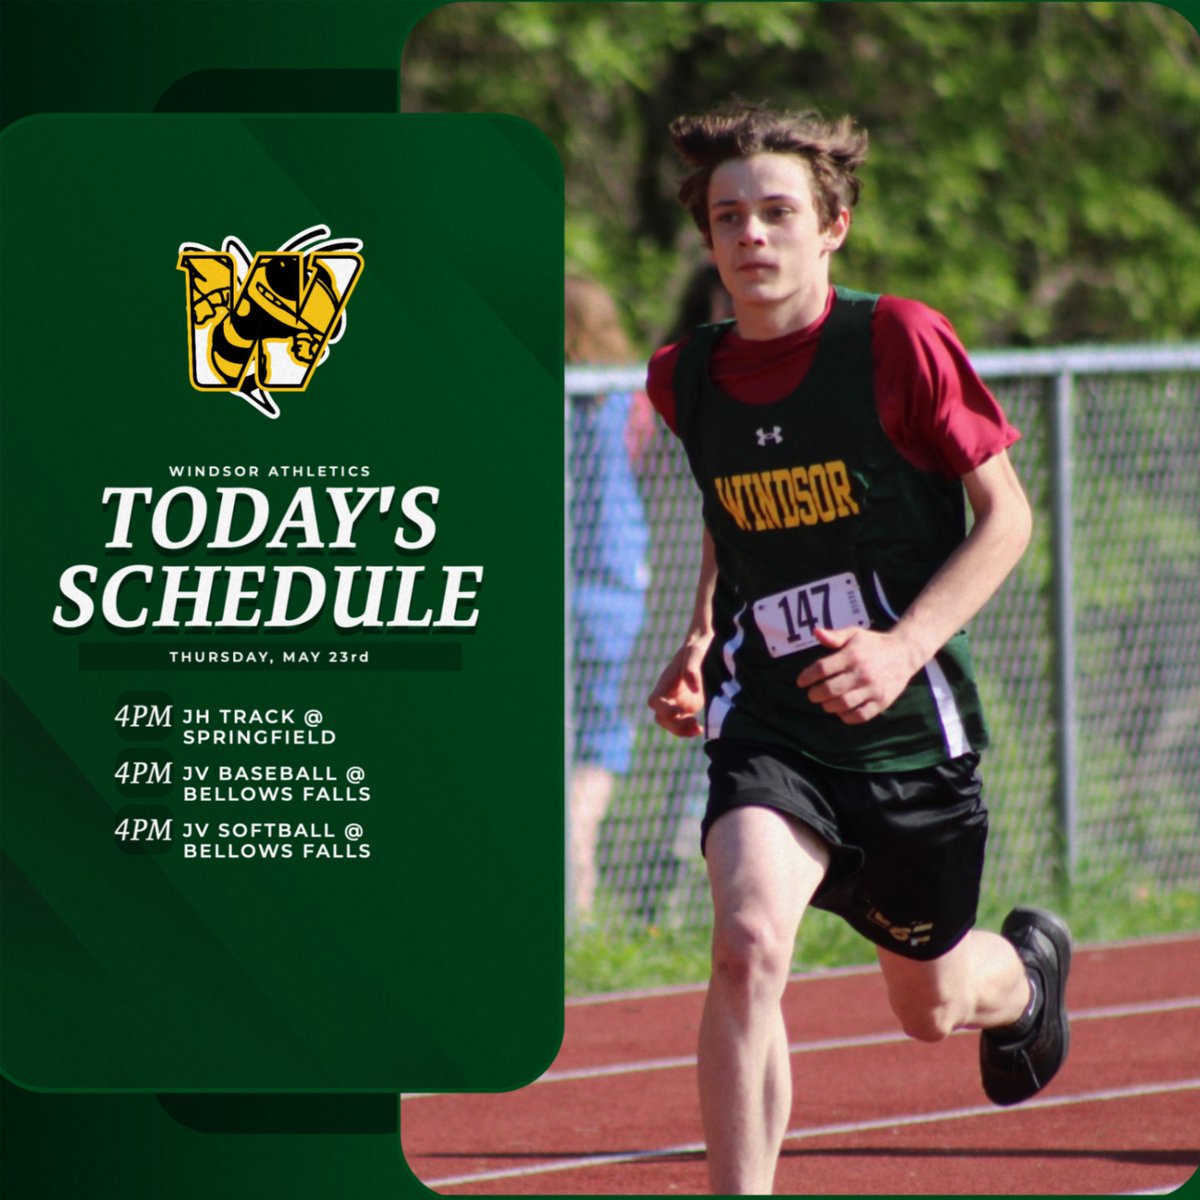 GAMEDAY/MEETDAY: Three events on the schedule today for the Jacks. JH Track & Field heads to Springfield while JV Baseball and JV Softball head to Bellows Falls. All events begin at 4pm. #swarmasone #gojacks